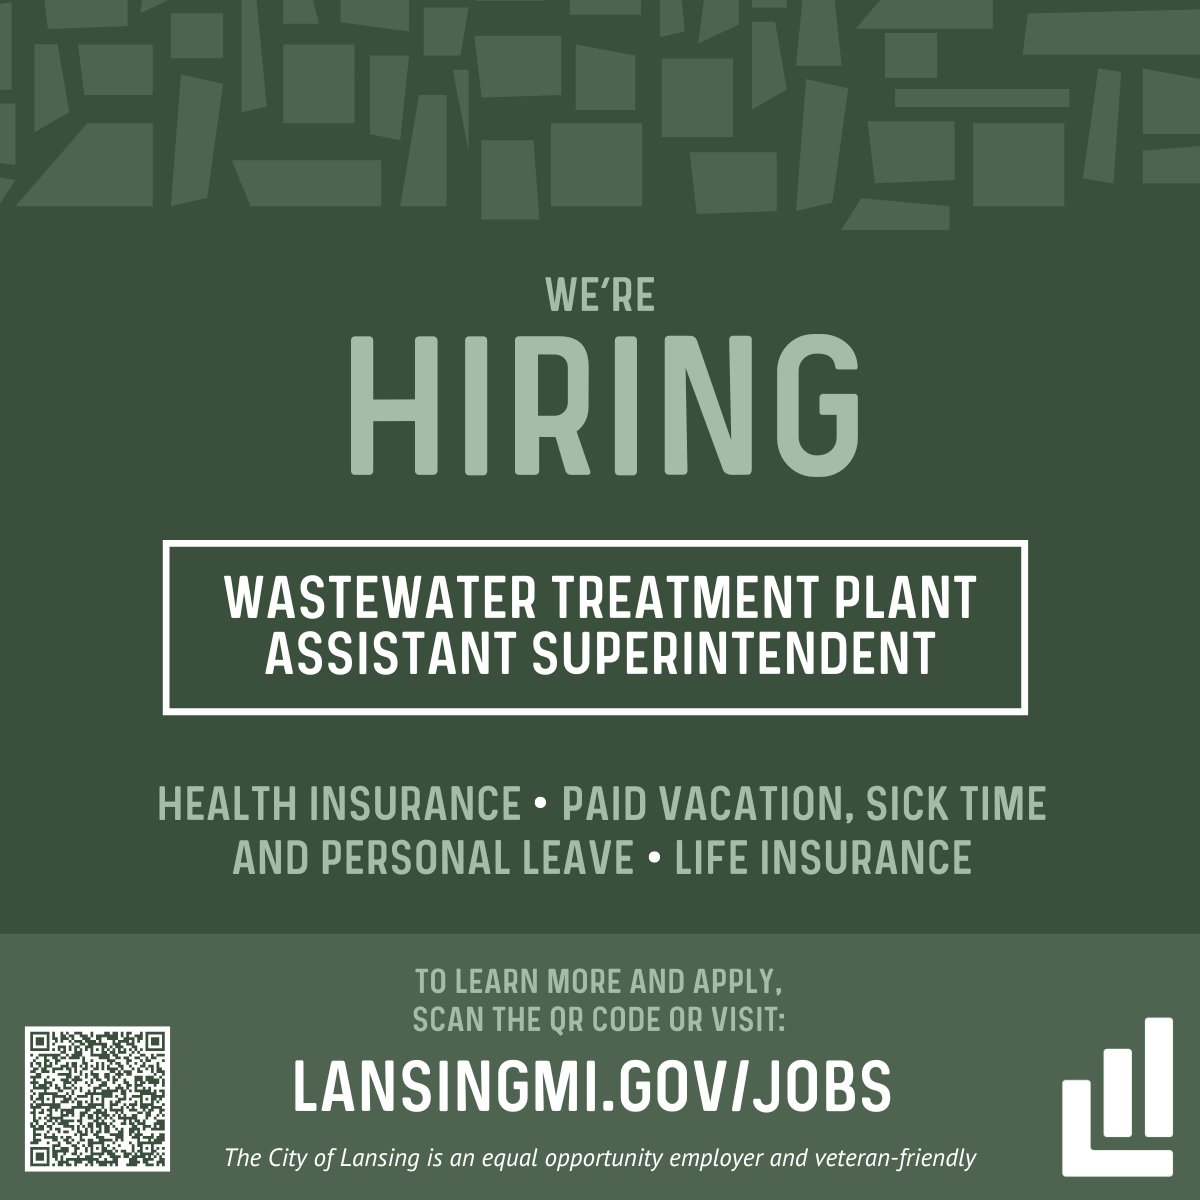 The City of Lansing is seeking to hire a Wastewater Treatment Plant Assistant Superintendent! Learn more and apply now: governmentjobs.com/careers/lansin….